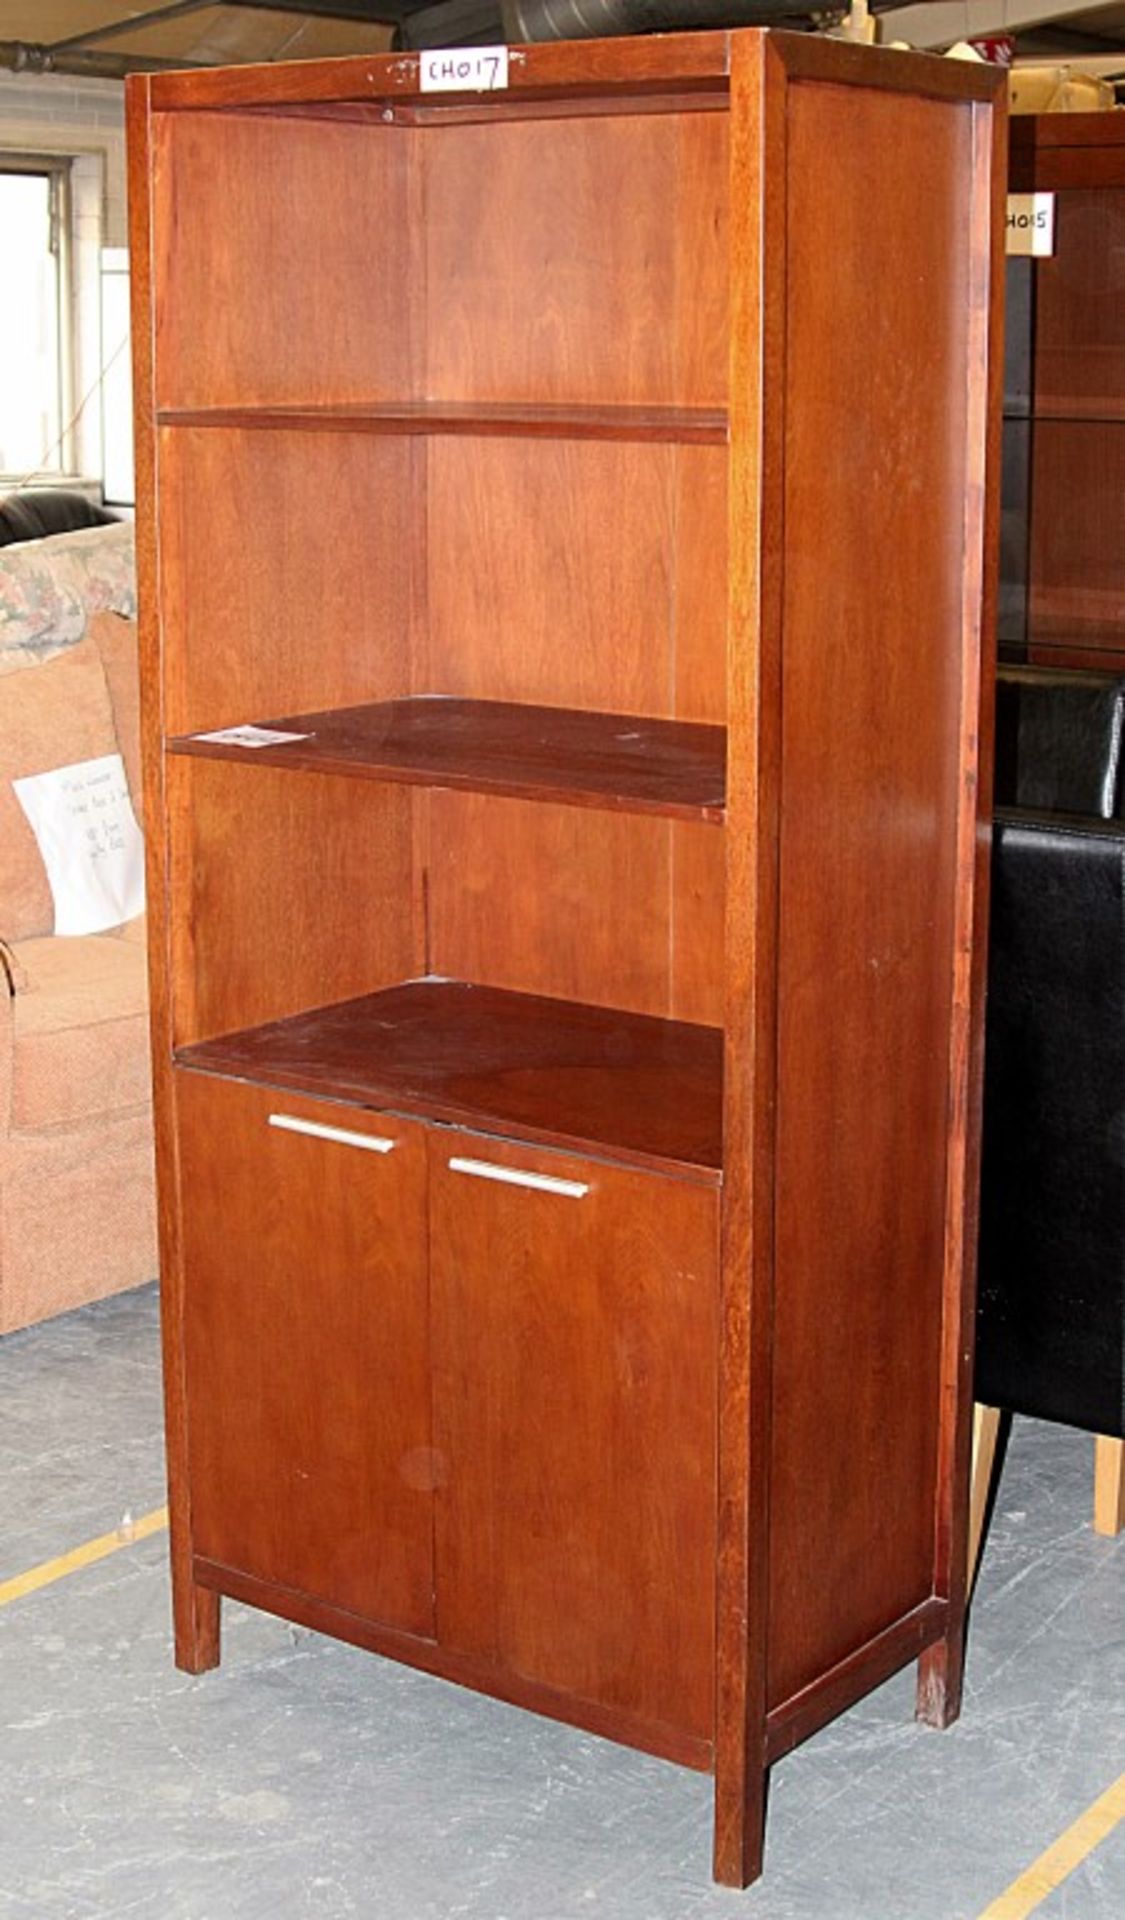 1 x Mahogany 3ft Tall 2 Door / 2 Shelf Unit With Glass Shelves – Ref CH017 – Ex Display Stock In